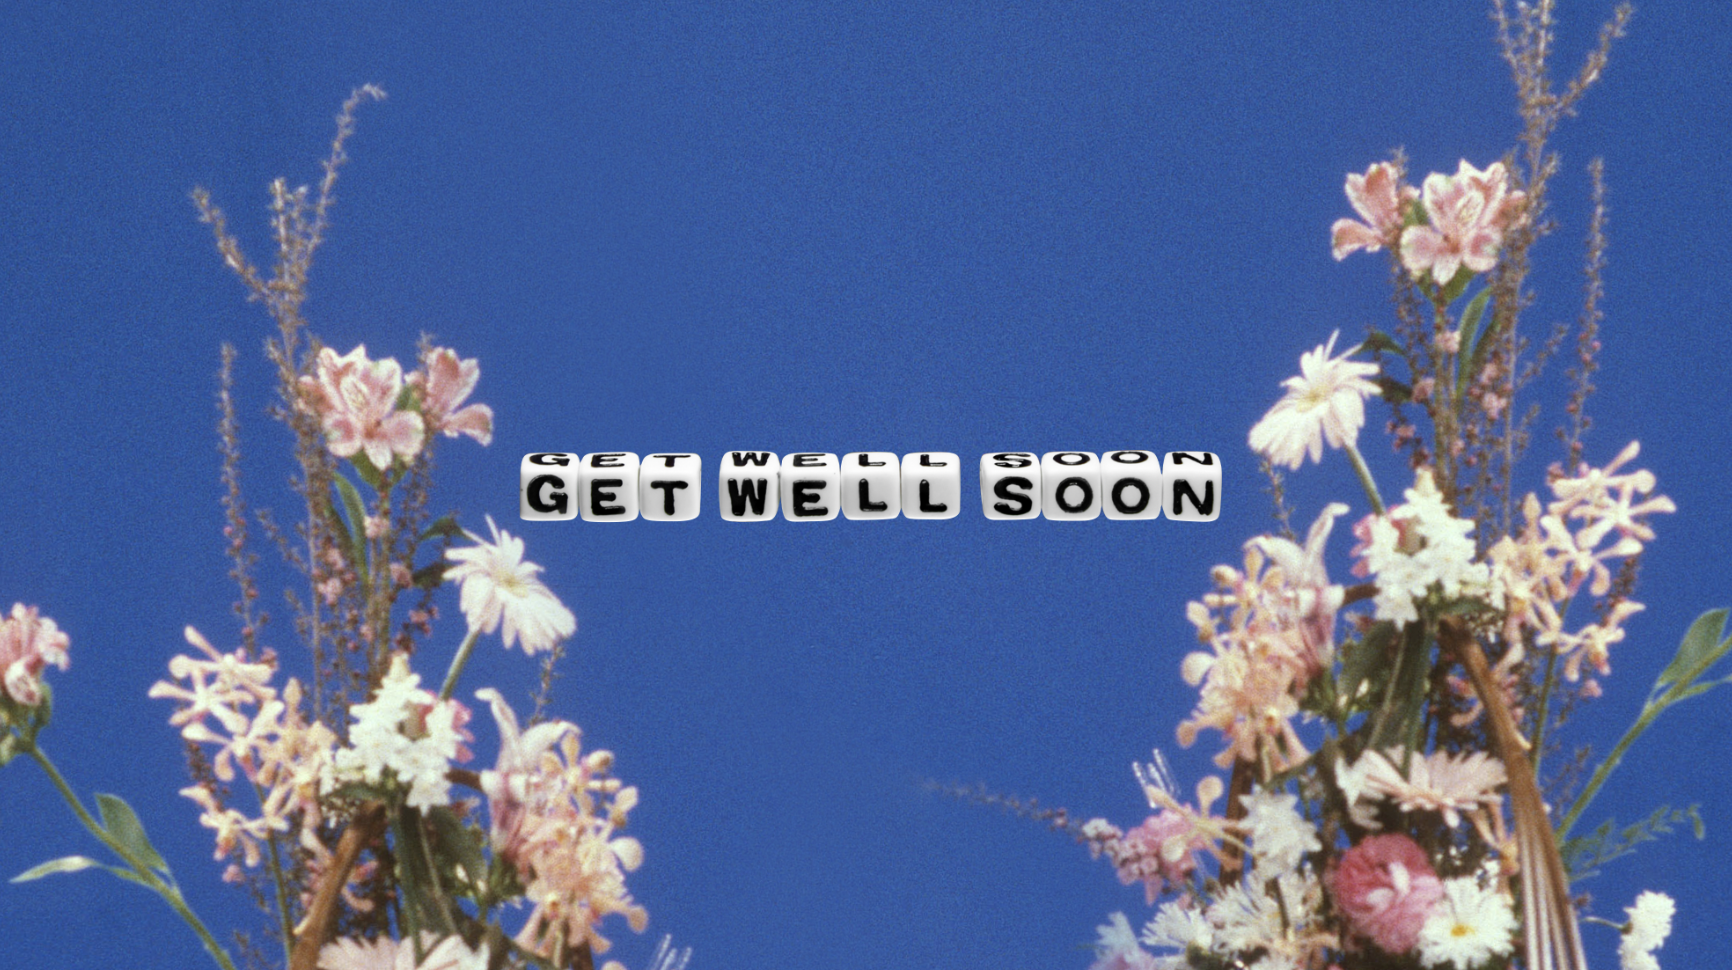 Get Well Soon For Her